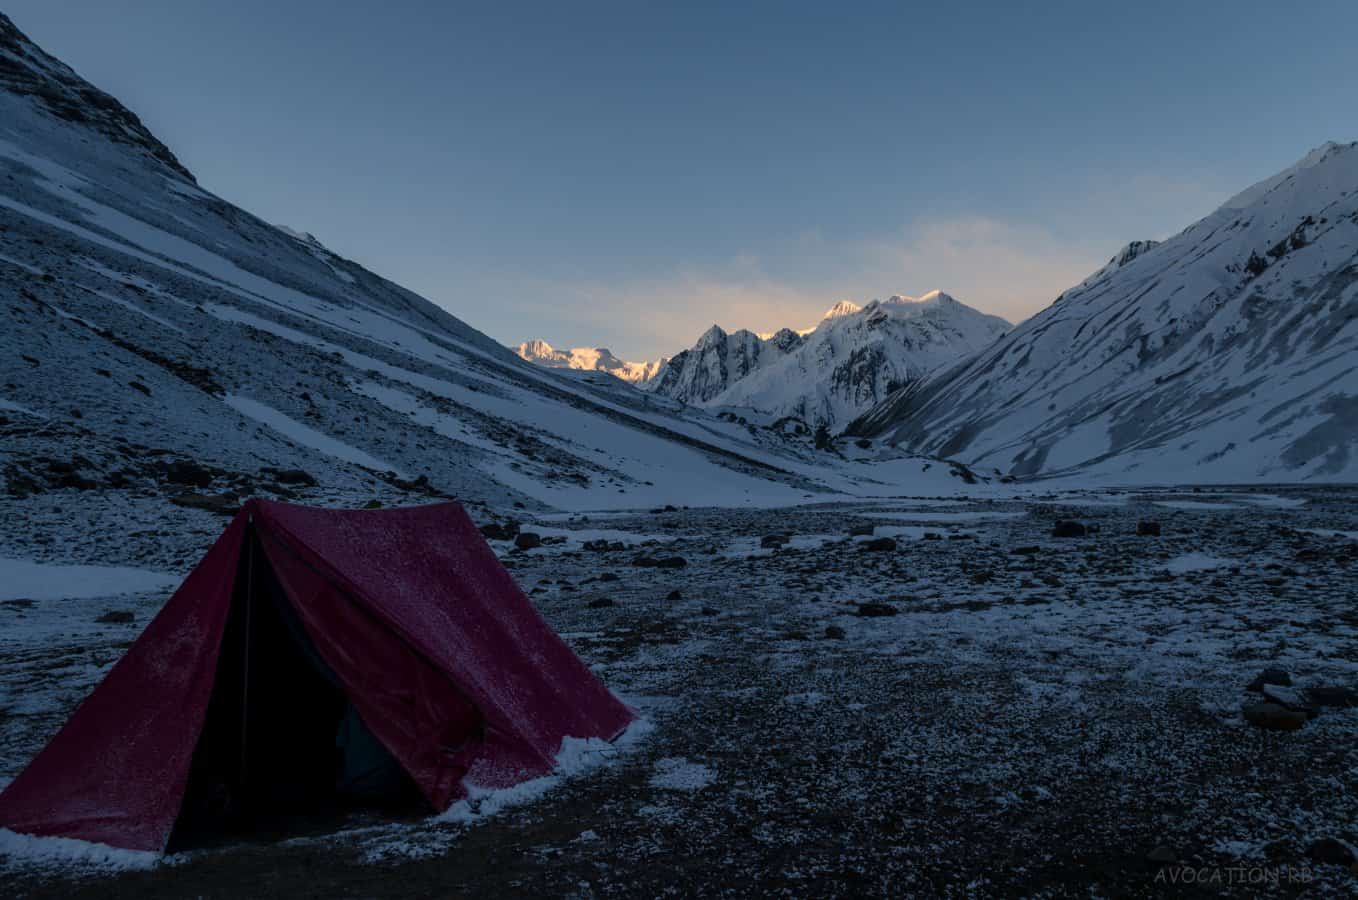 And us in the center of Nithal Thach Camp site [Lamkhaga pass trek expedition 2015]